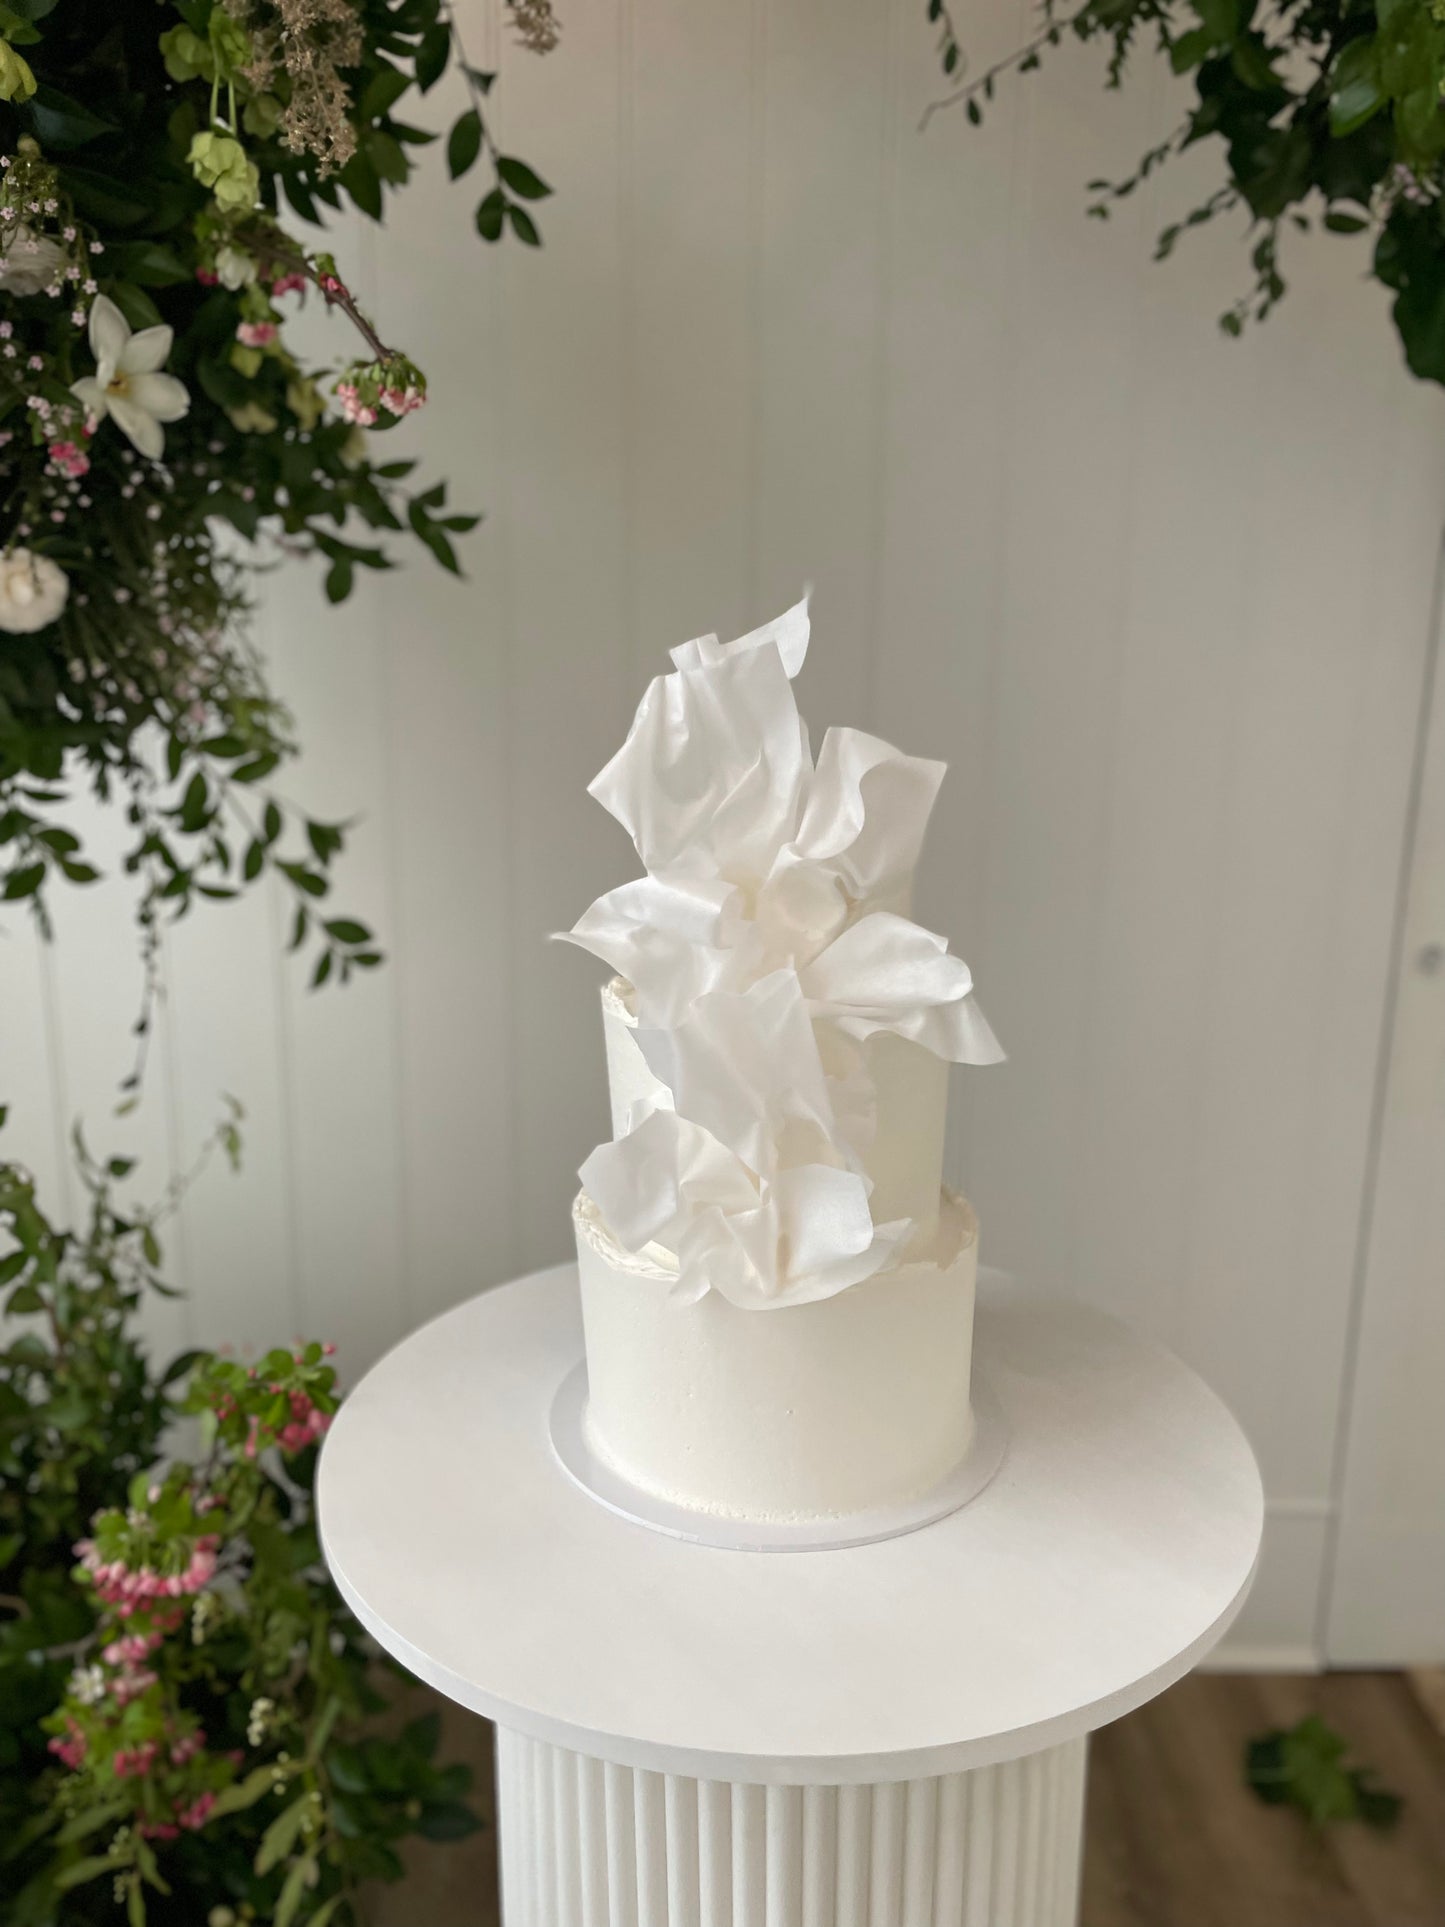 3 Tier Buttercream with Wafer Paper Sails